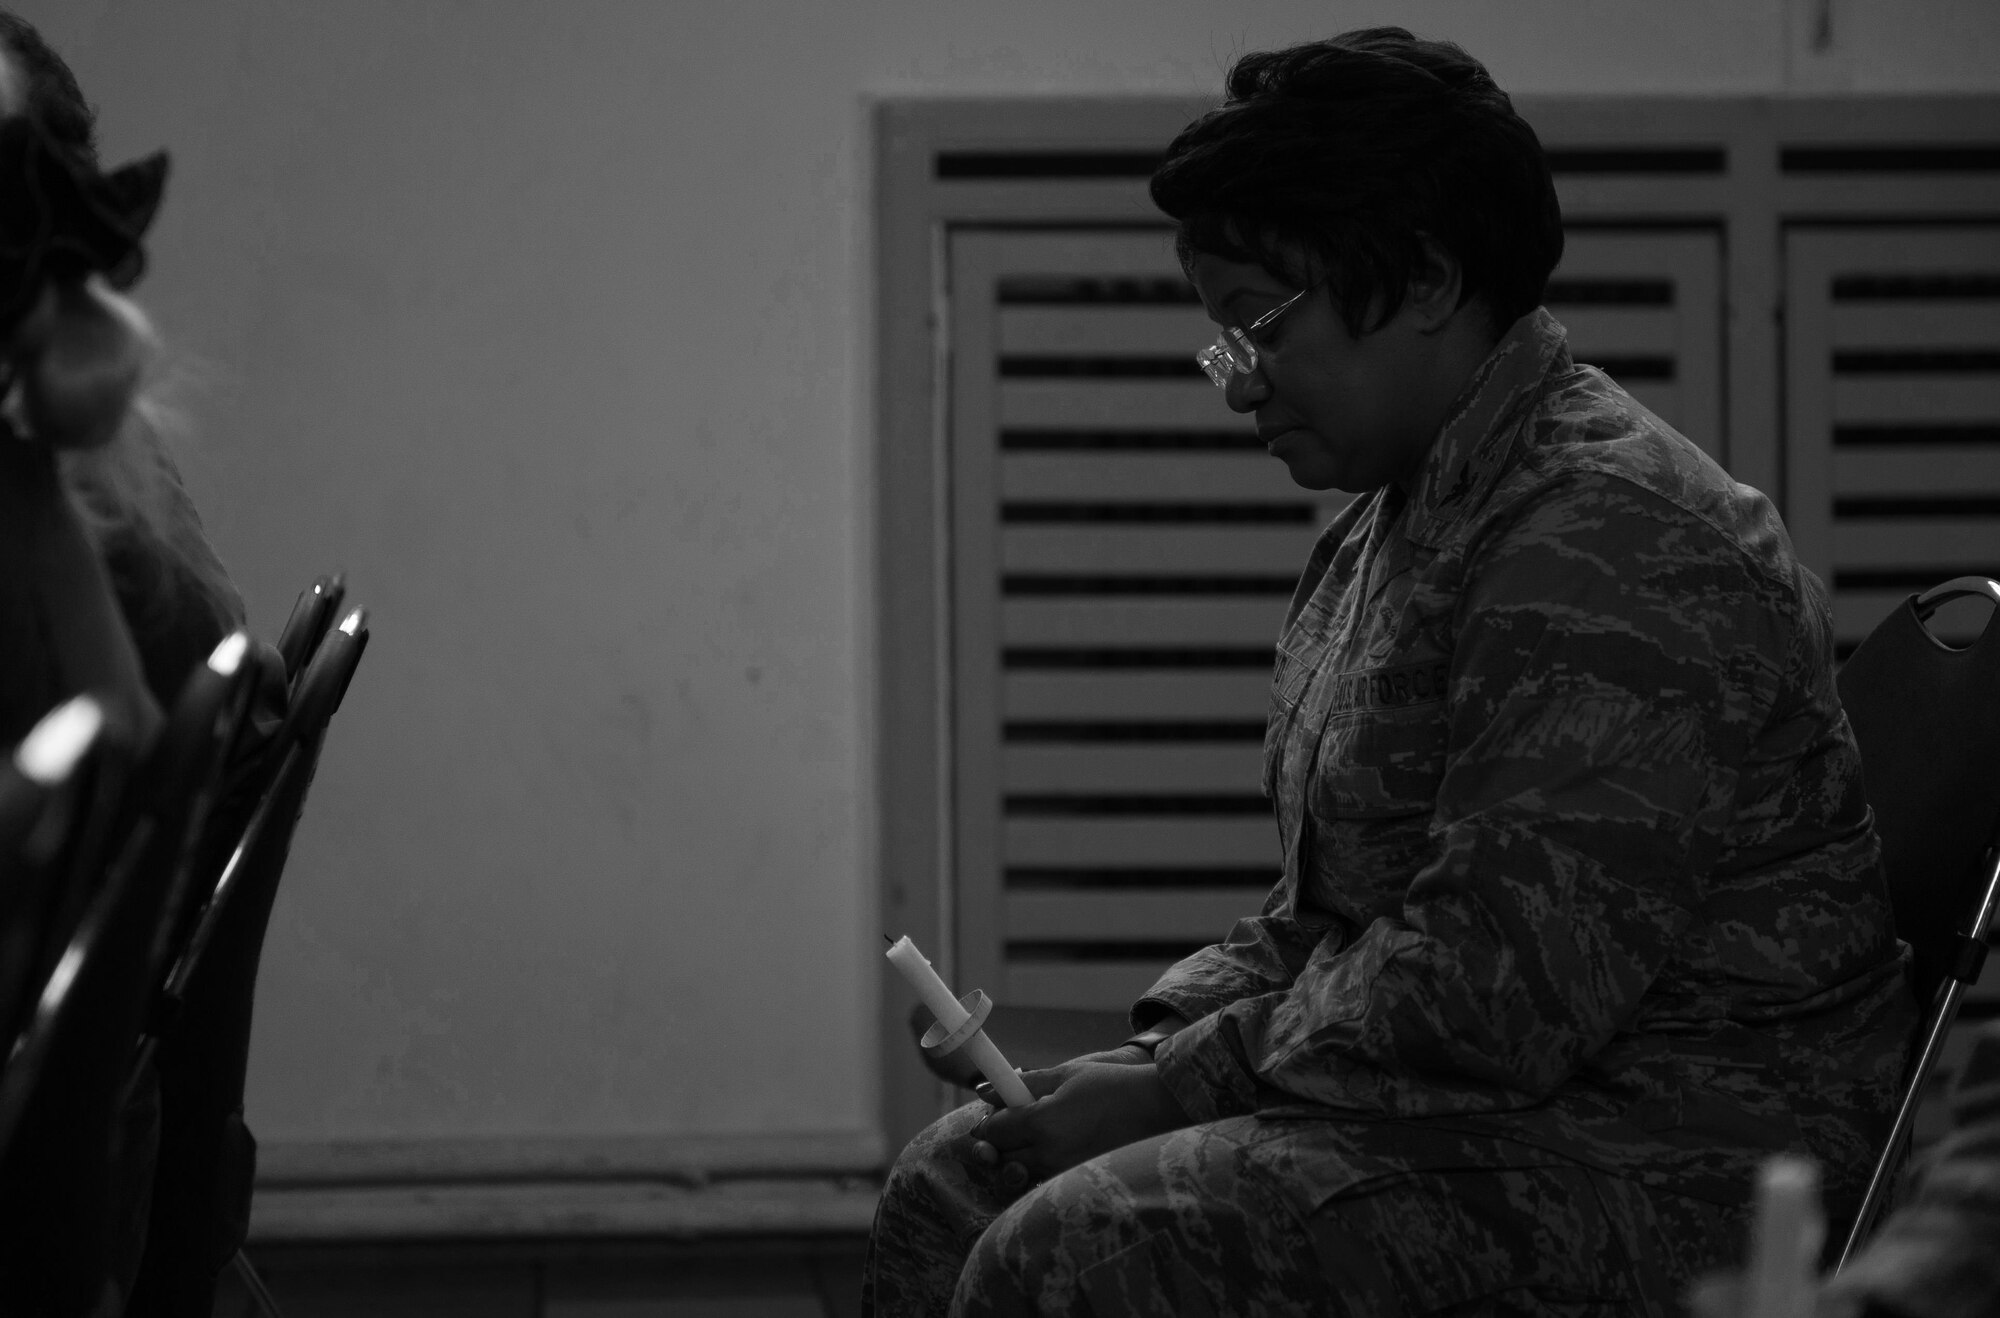 Col. Donnette Boyd, 86th Airlift Wing chaplain, holds a moment of silence to remember the victims of interpersonal violence during a candlelight vigil at Ramstein Air Base, Germany, Oct. 27, 2016. According to the Center for Disease Control and Prevention, over the course of a year, more than 10 million U.S. citizens are victims of domestic violence, sexual abuse, child violence and bullying or suicide. The devastating physical, emotional, and psychological consequences of interpersonal violence can cross generations and last lifetimes. (U.S. Air Force photo by Airman 1st Class Lane T. Plummer)